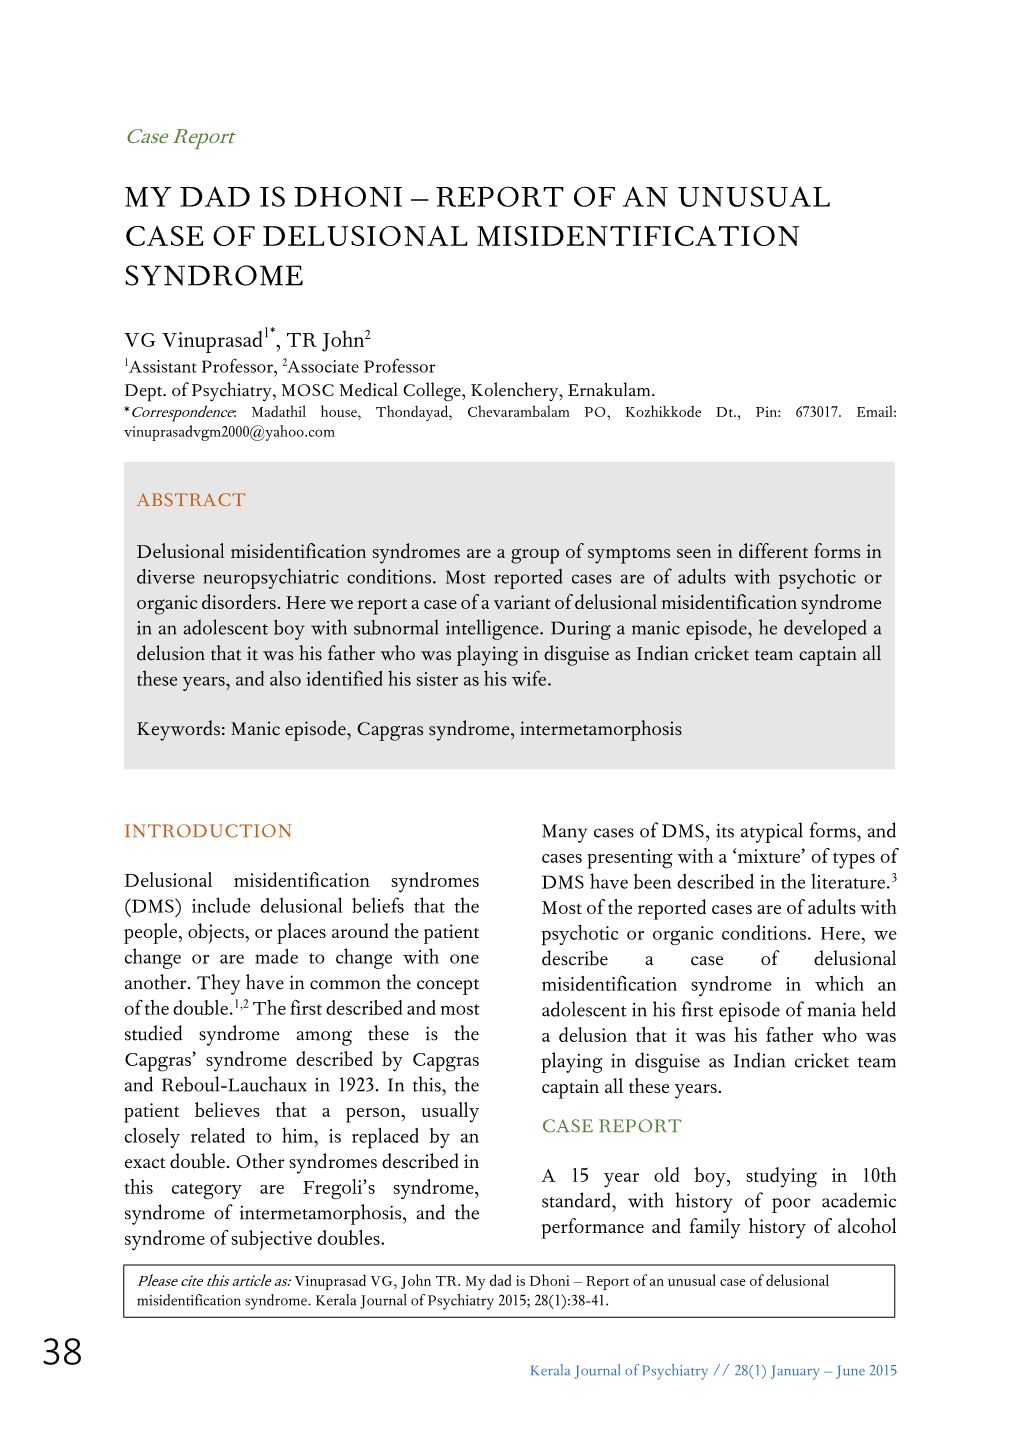 Report of an Unusual Case of Delusional Misidentification Syndrome